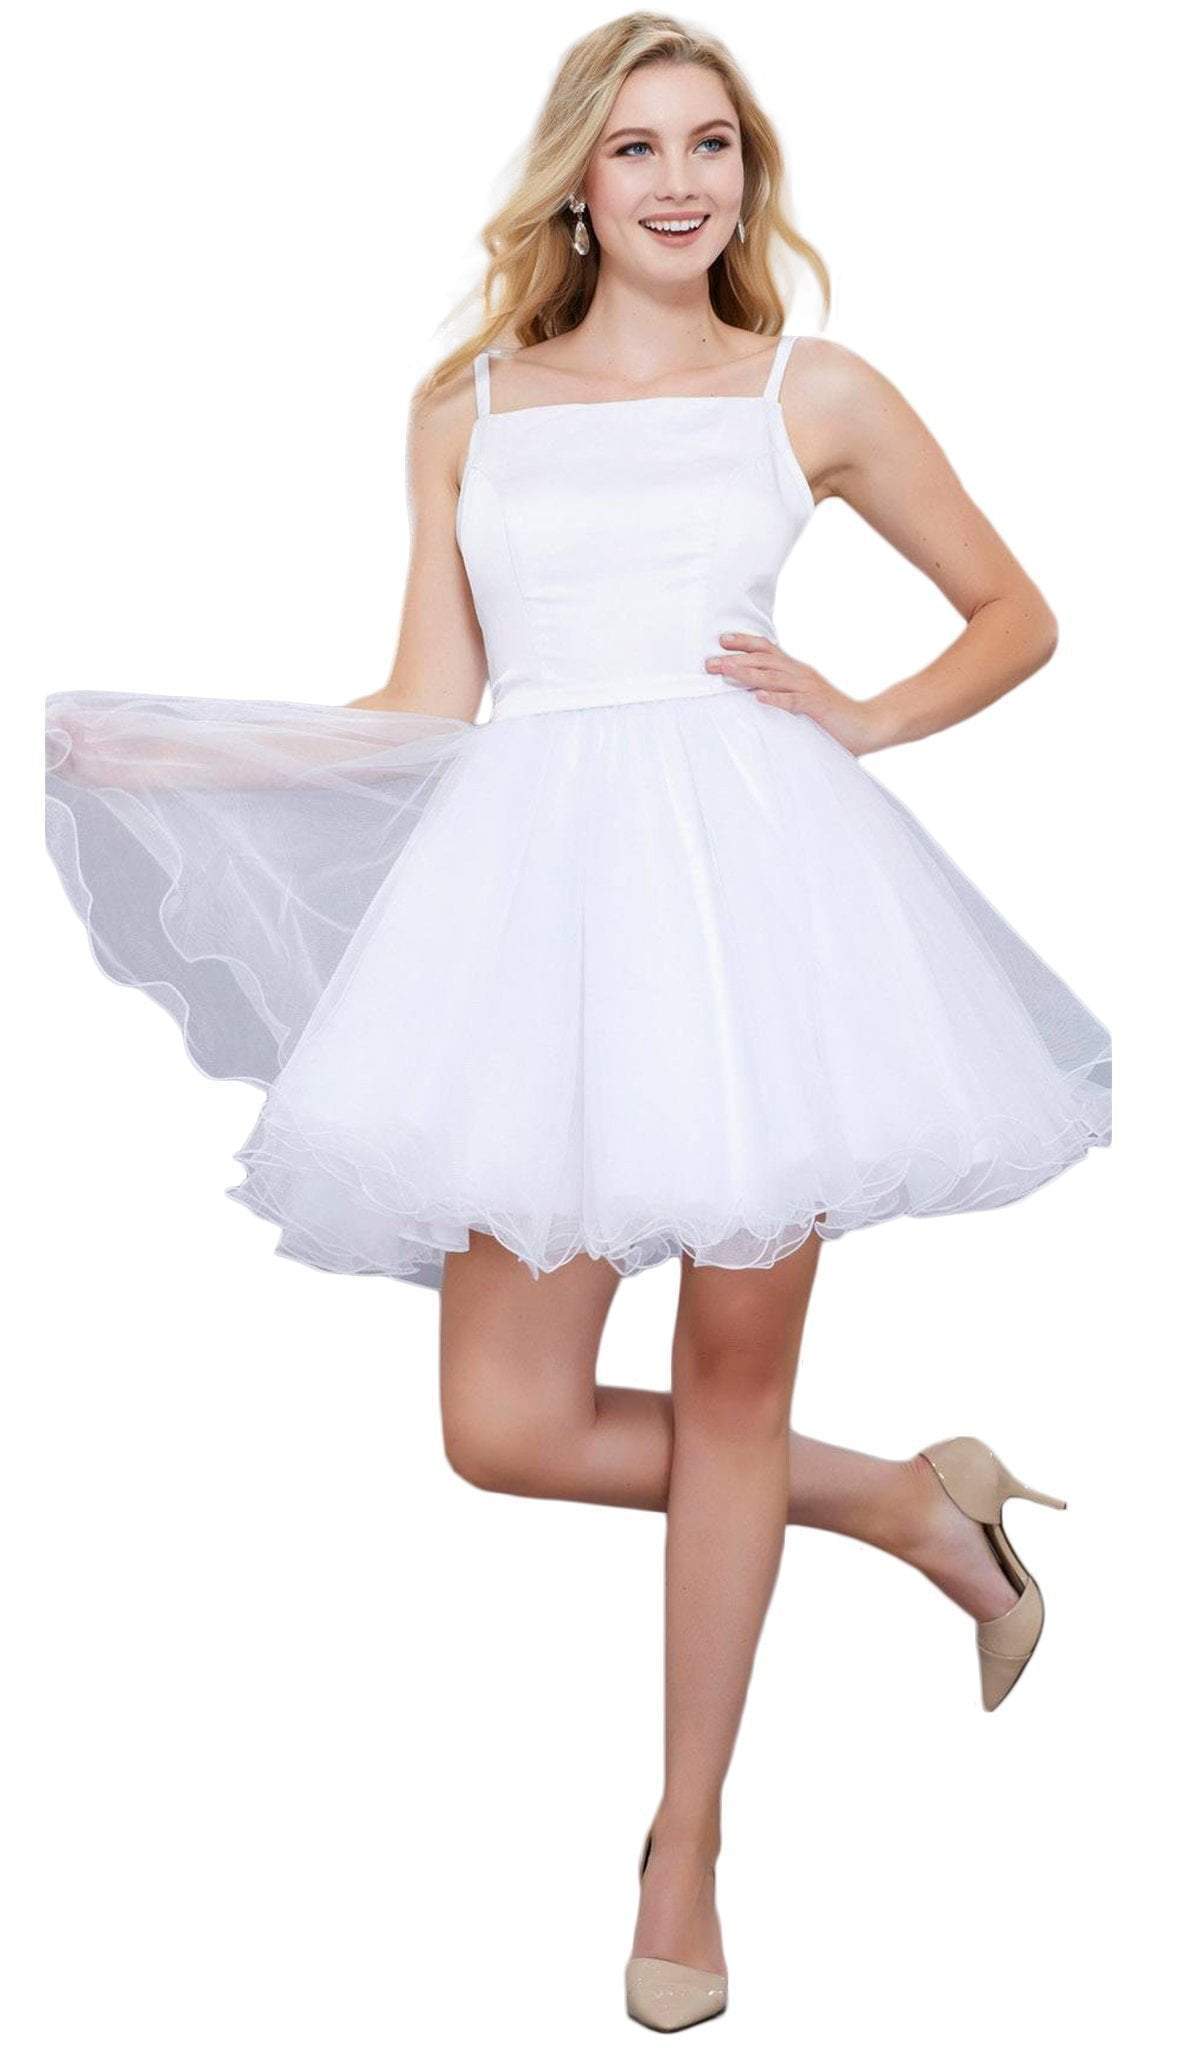 Nox Anabel - 6353 Sleeveless Straight-Across Neck Chiffon Cocktail Dress Special Occasion Dress XS / White